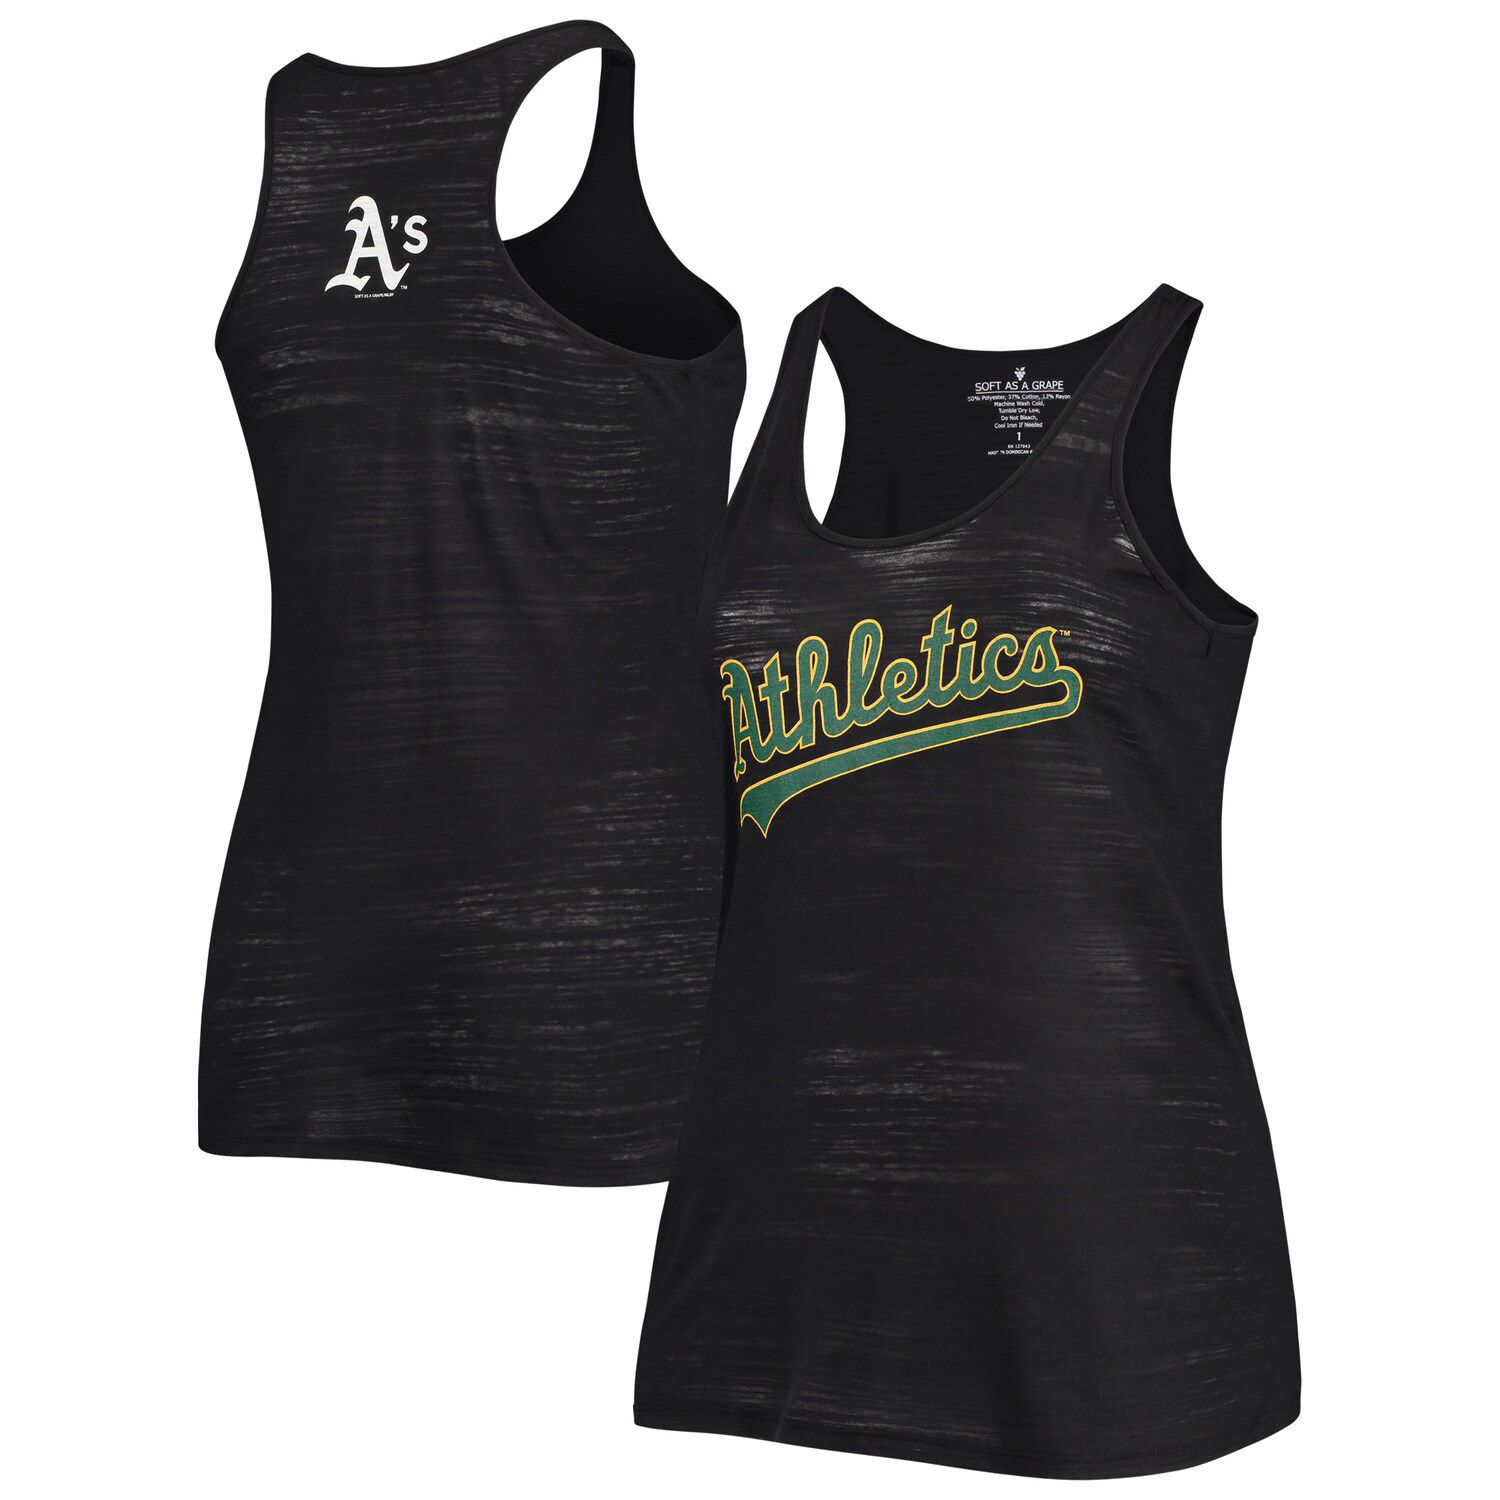 Image for Unbranded Women's Soft as a Grape Black Oakland Athletics Plus Size Swing for the Fences Tri-Blend Racerback Tank Top at Kohl's.